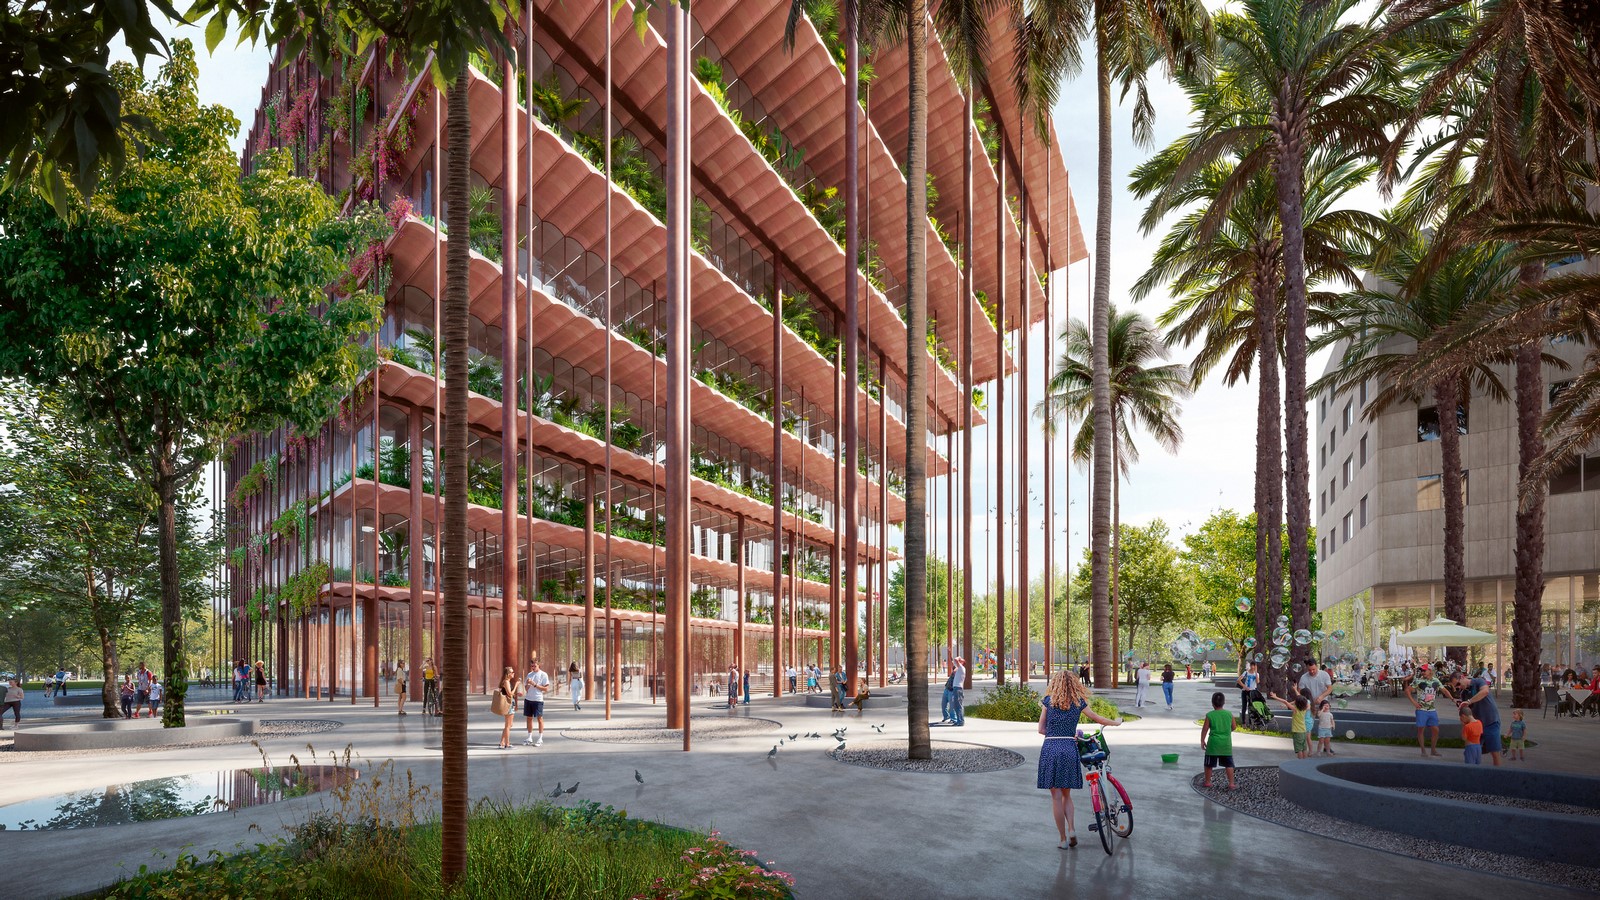 Barcelona Institute of Science and Technology by BIG: A forest of columns - Sheet2